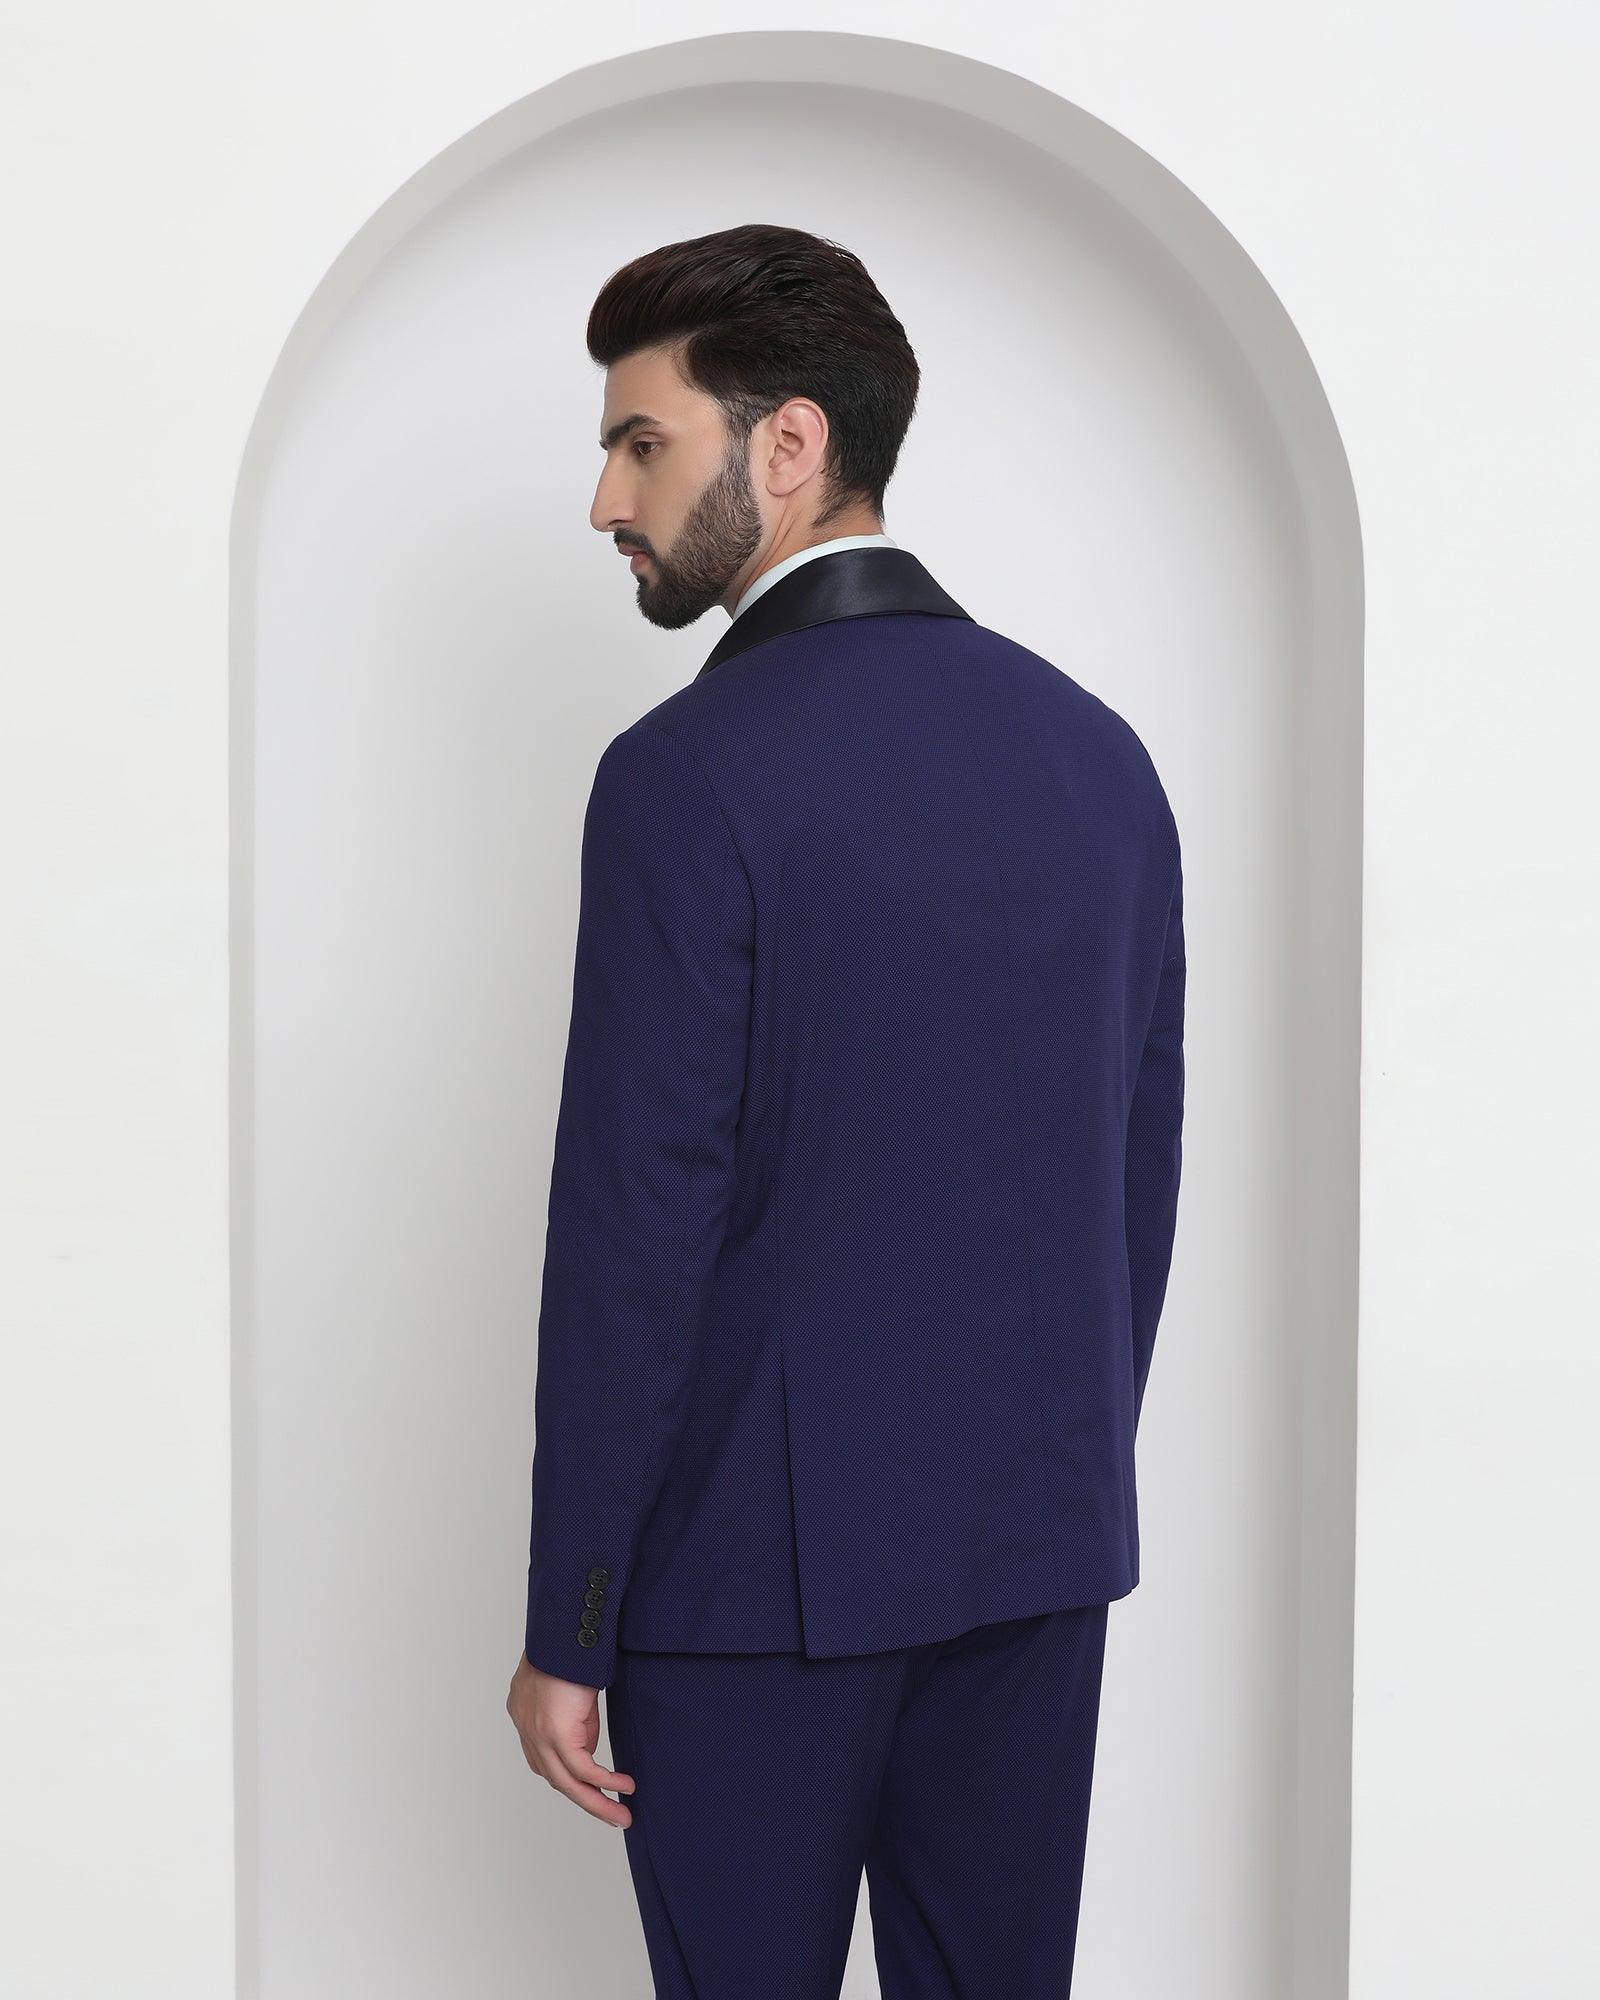 Tuxedo Two Piece Navy Textured Formal Suit - Thames